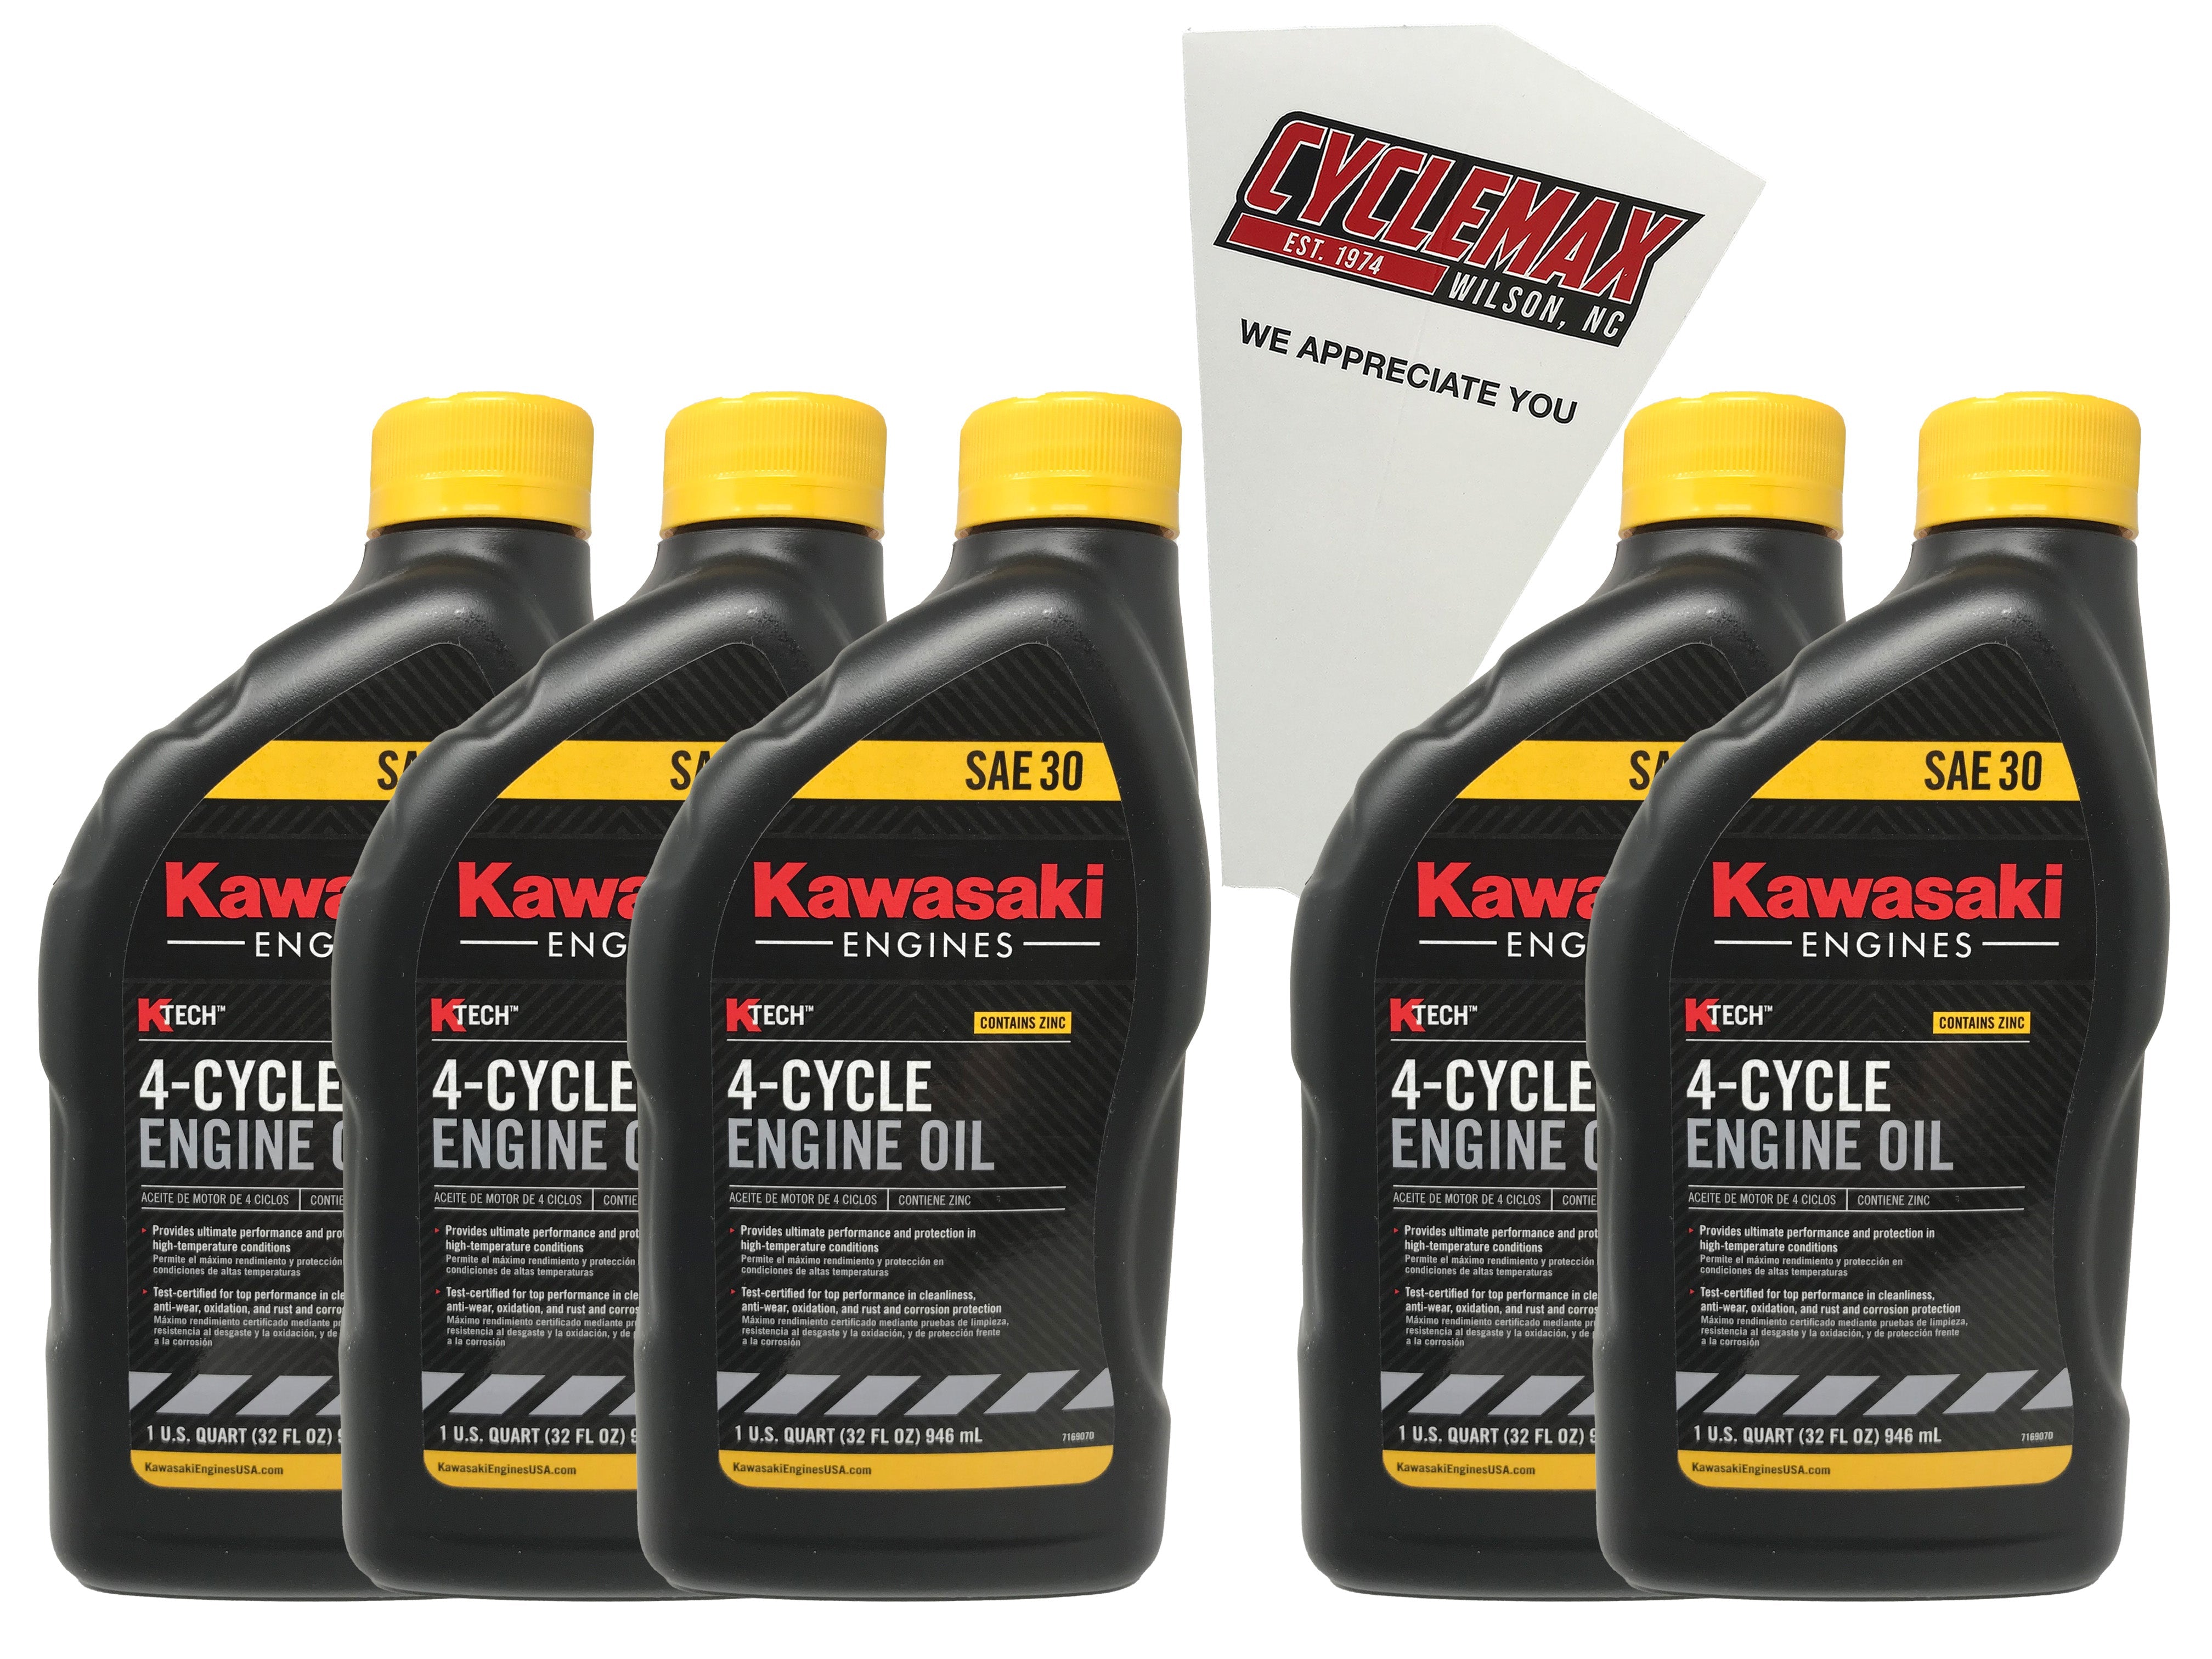 Cyclemax Five Pack for Kawasaki SAE 30W K-Tech Lawnmower Engine Oil 99969-6281 Contains Five Quarts and a Funnel